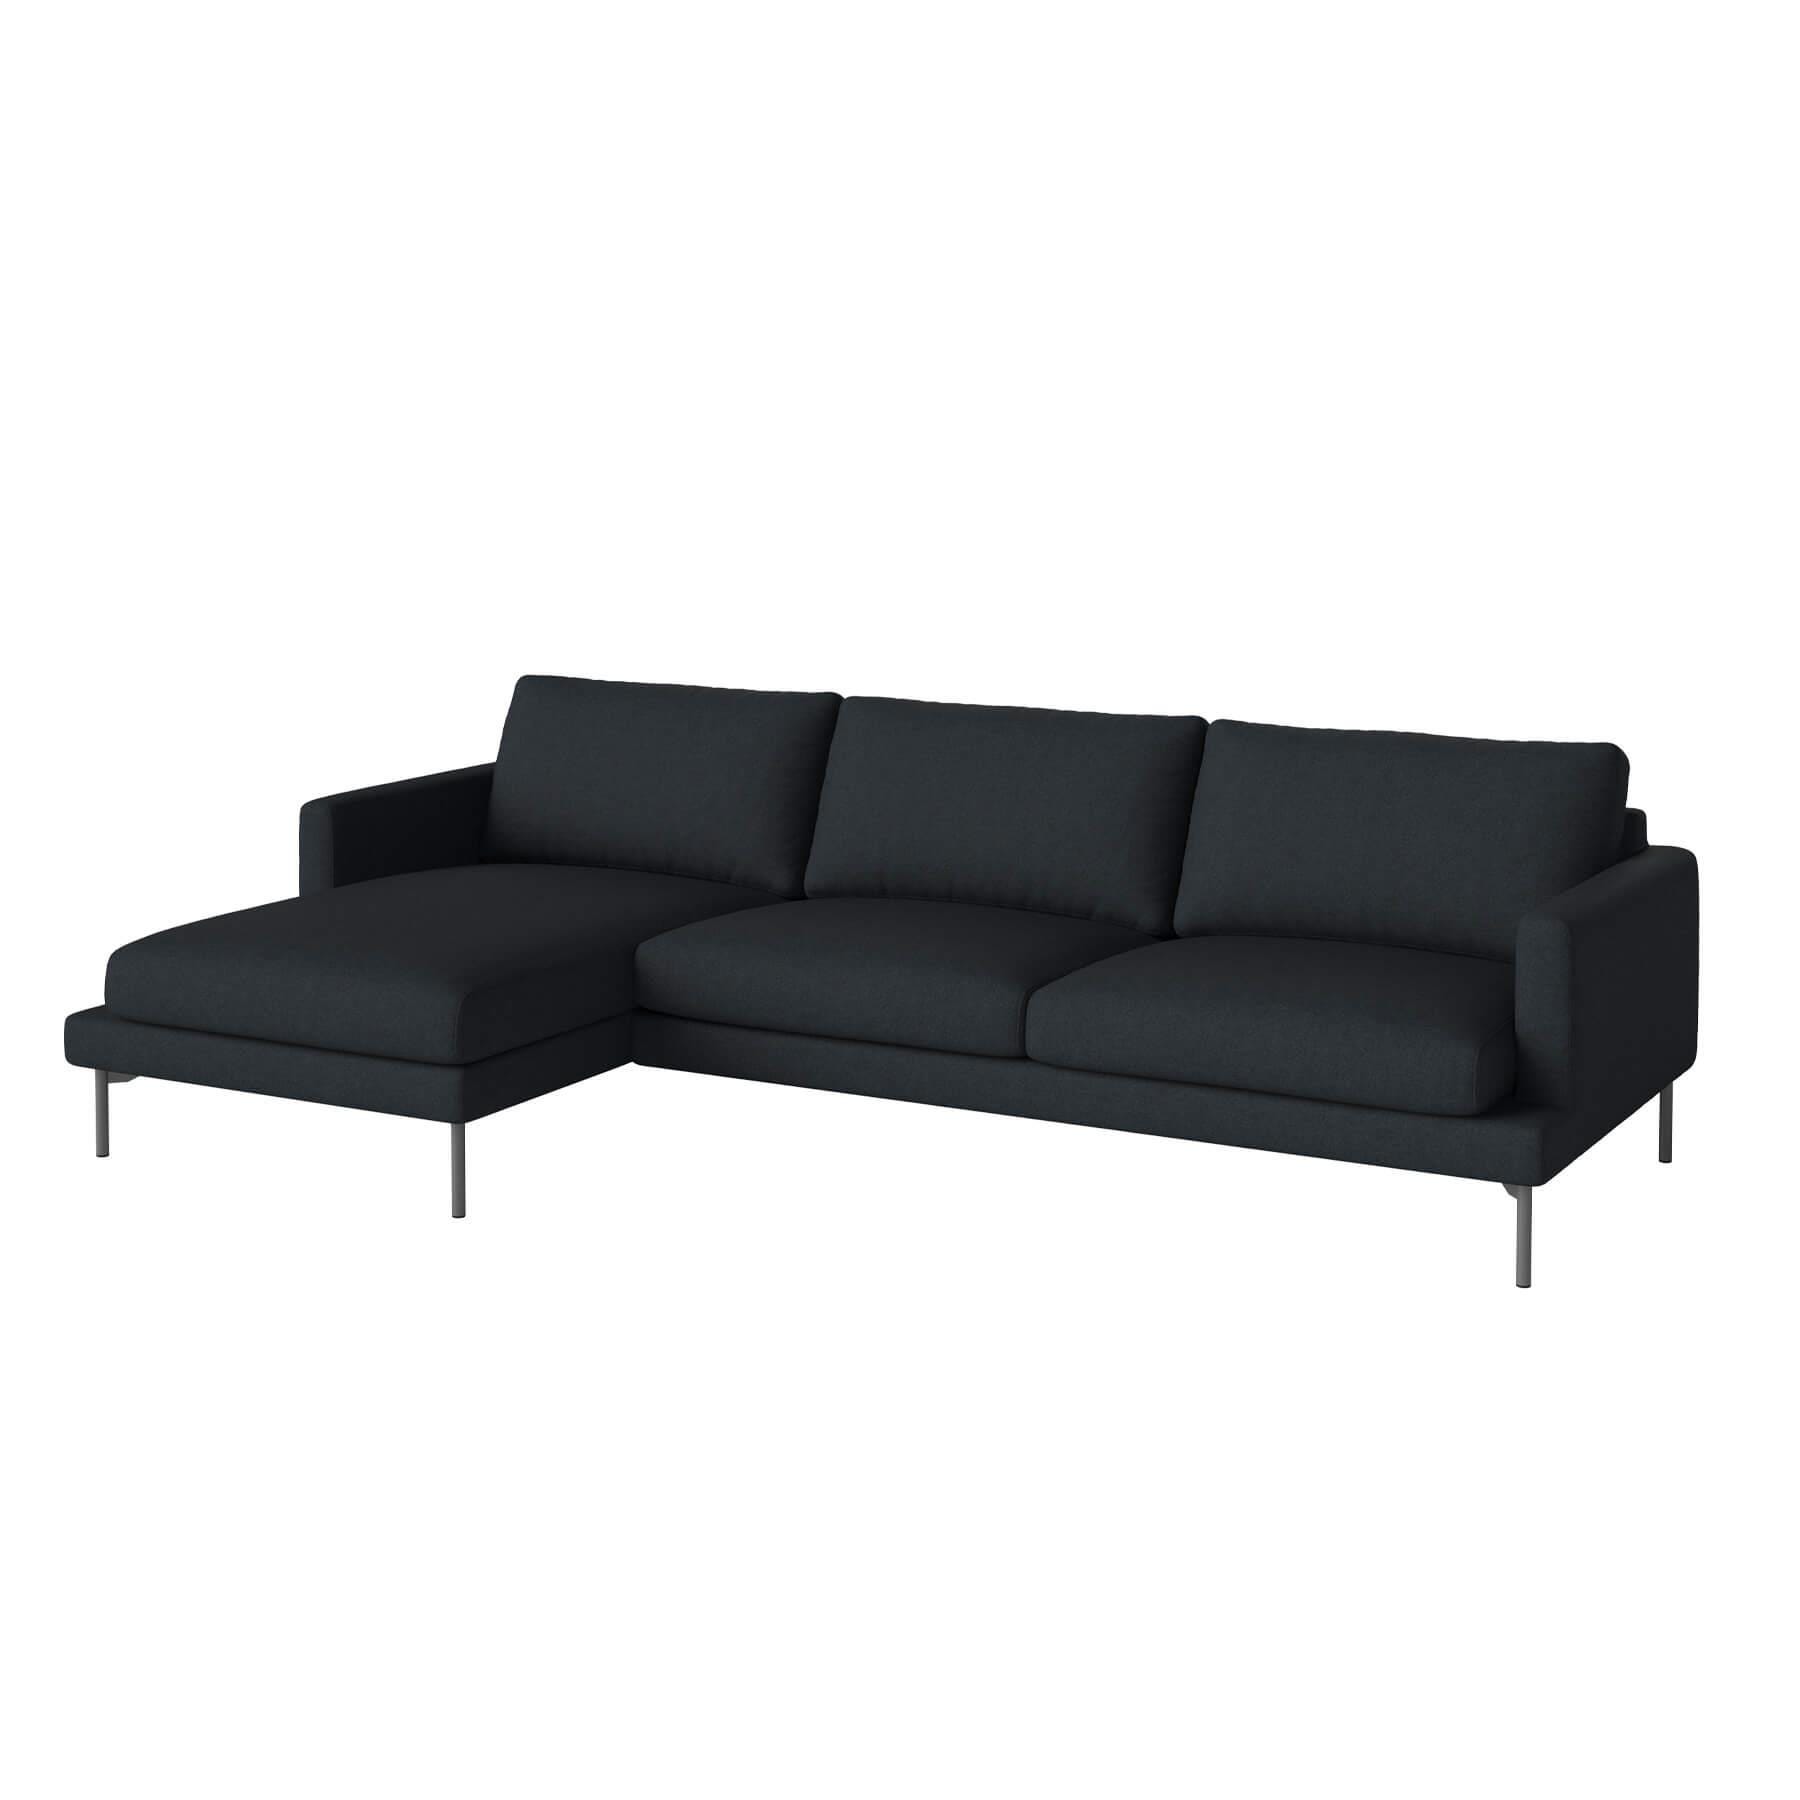 Bolia Veneda Sofa 35 Seater Sofa With Chaise Longue Grey Laquered Steel Qual Navy Left Blue Designer Furniture From Holloways Of Ludlow